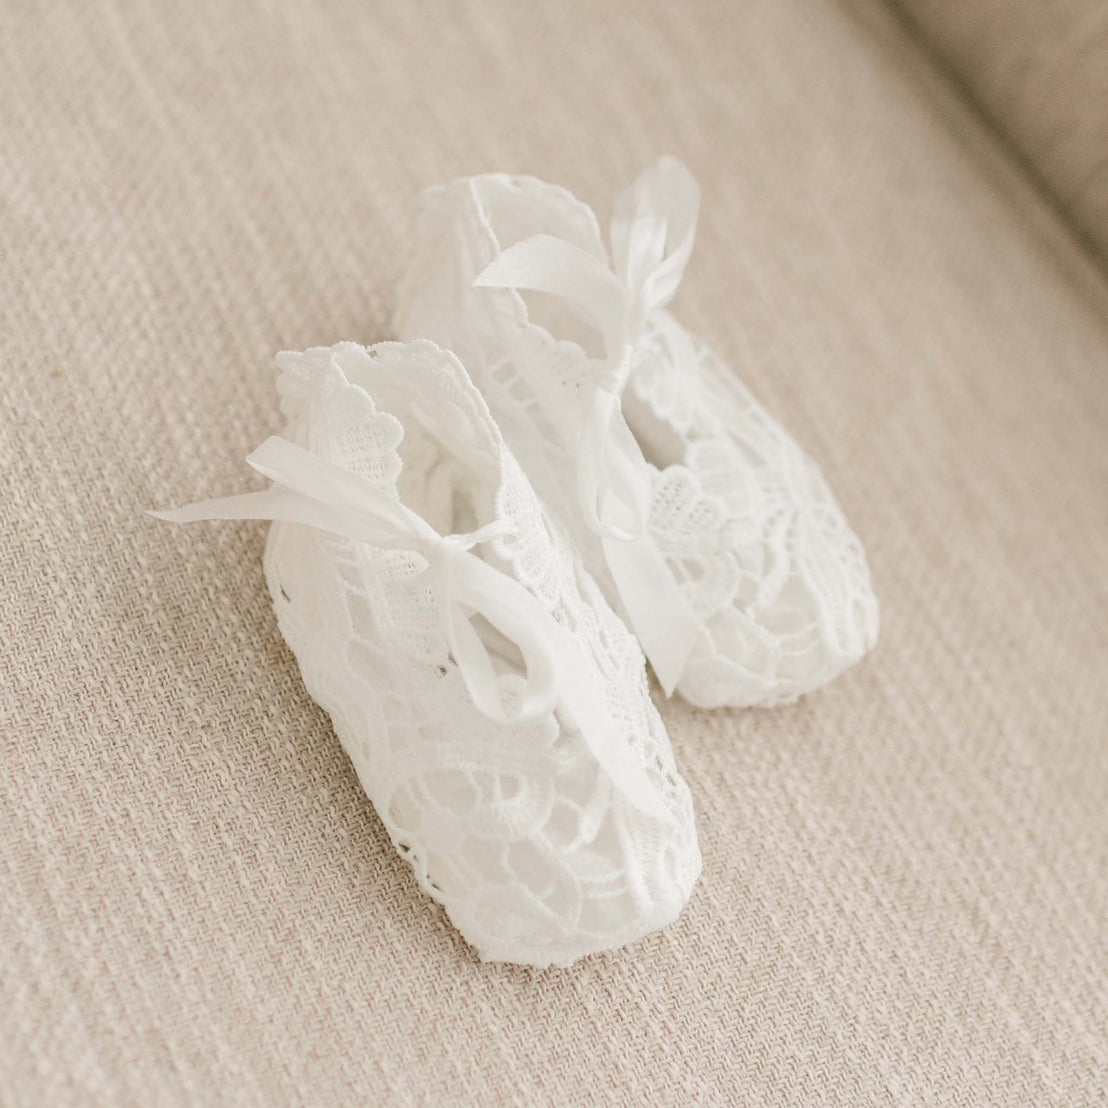 Flat lay of the Lola Booties made with an all-over lace in a light ivory color and a silk bow tie.